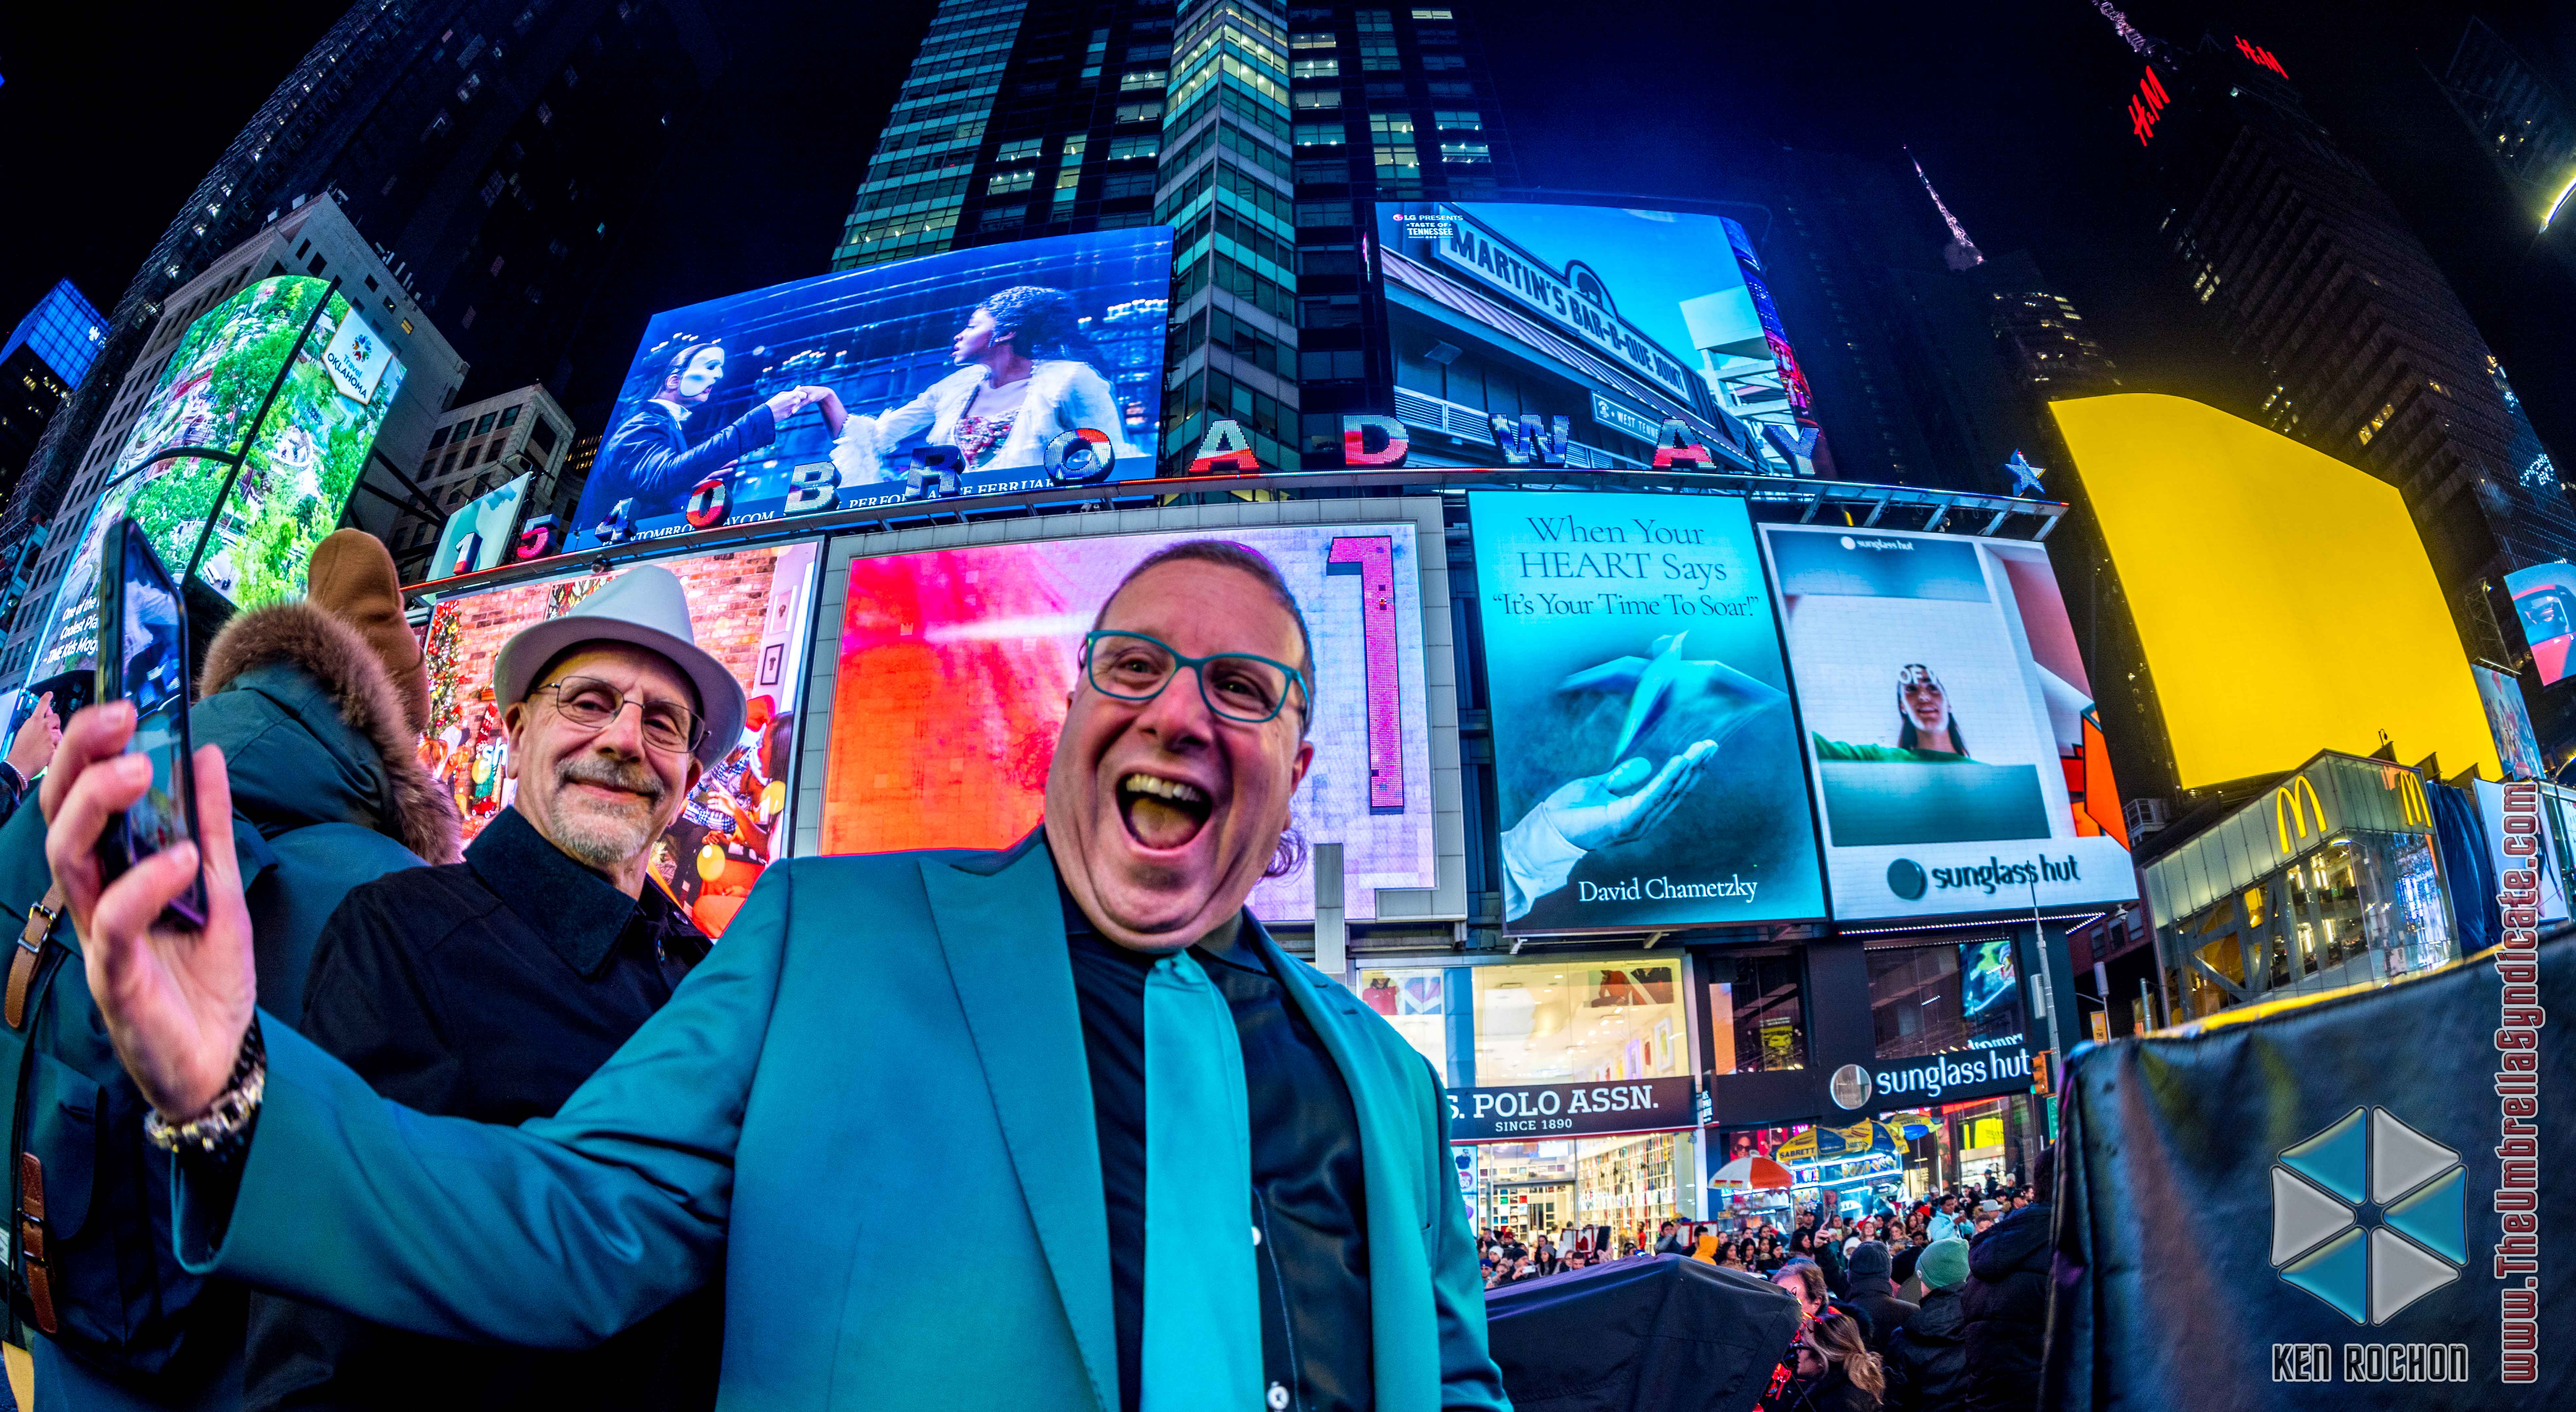 Man showing excitement in a selfie in front of NY Times Square billboards.